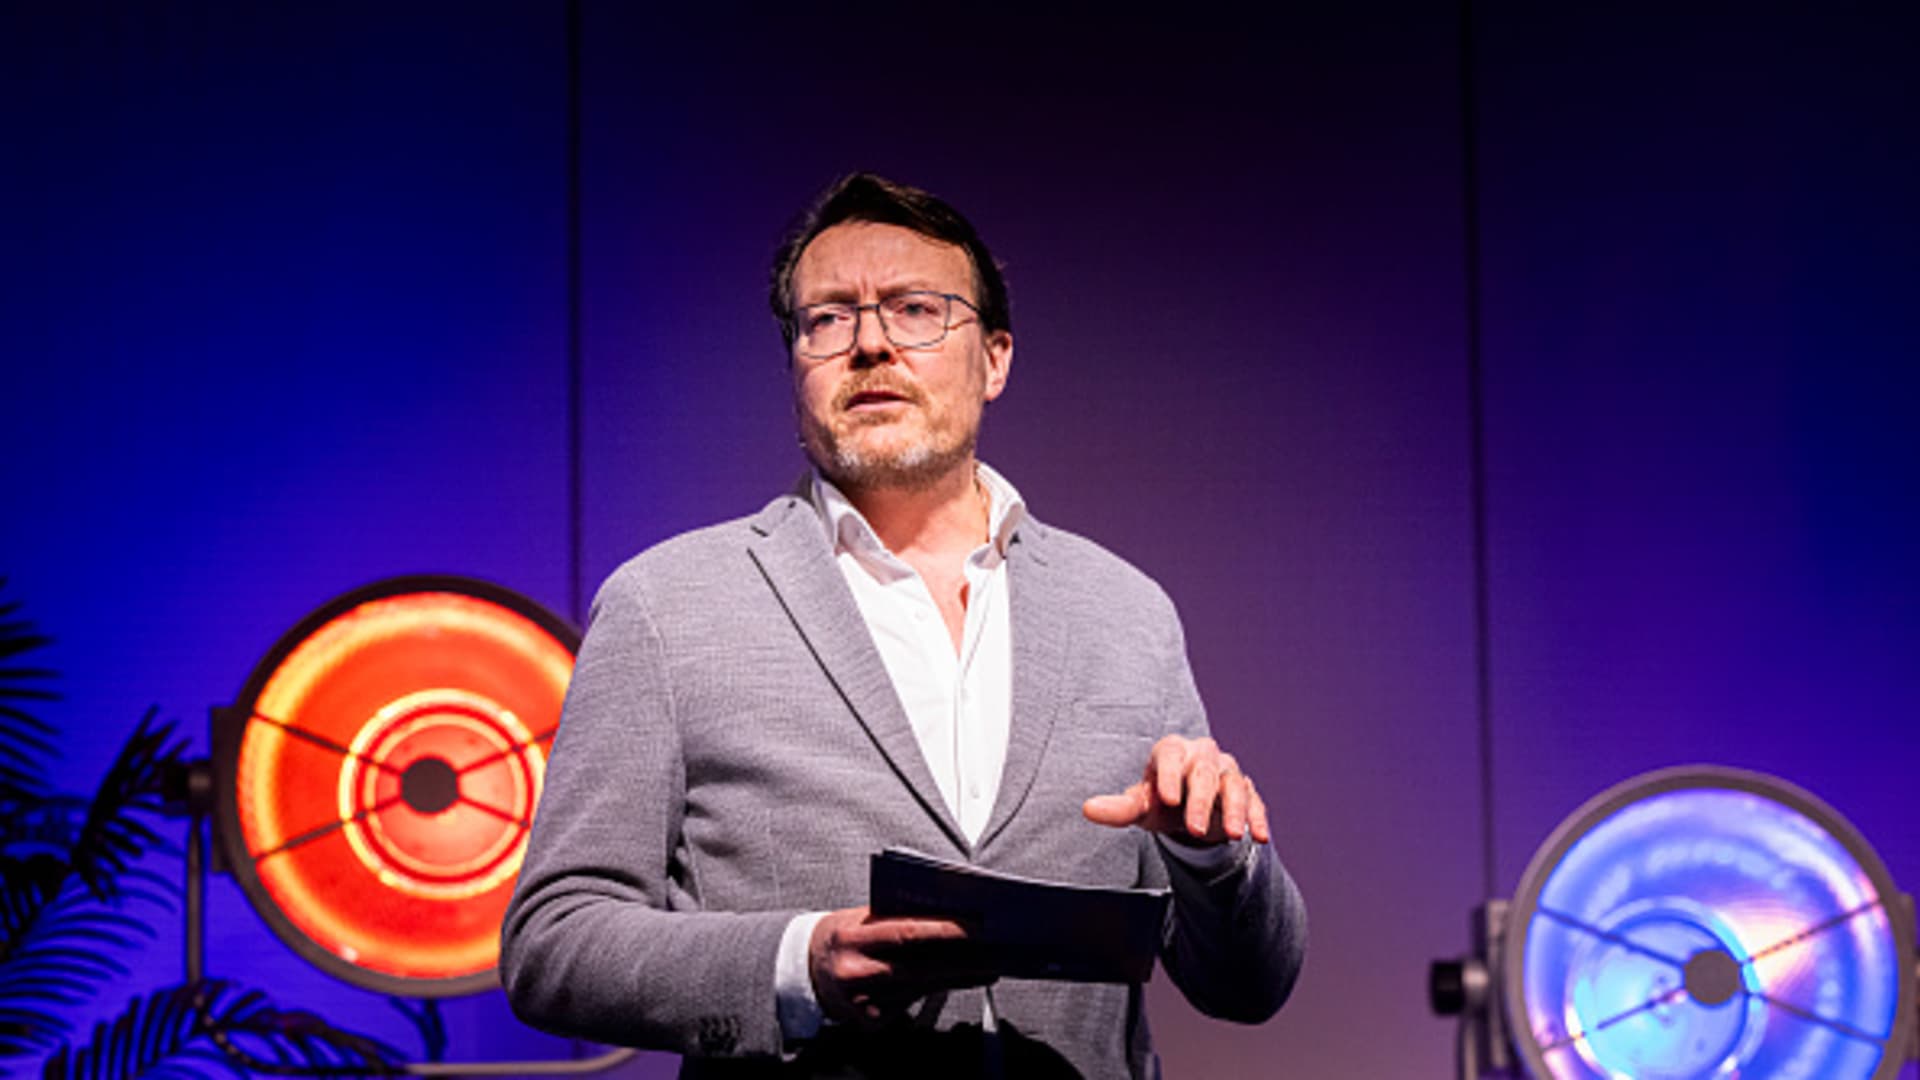 Europe is in danger of falling behind the US and China in the field of AI: Prince Constantijn